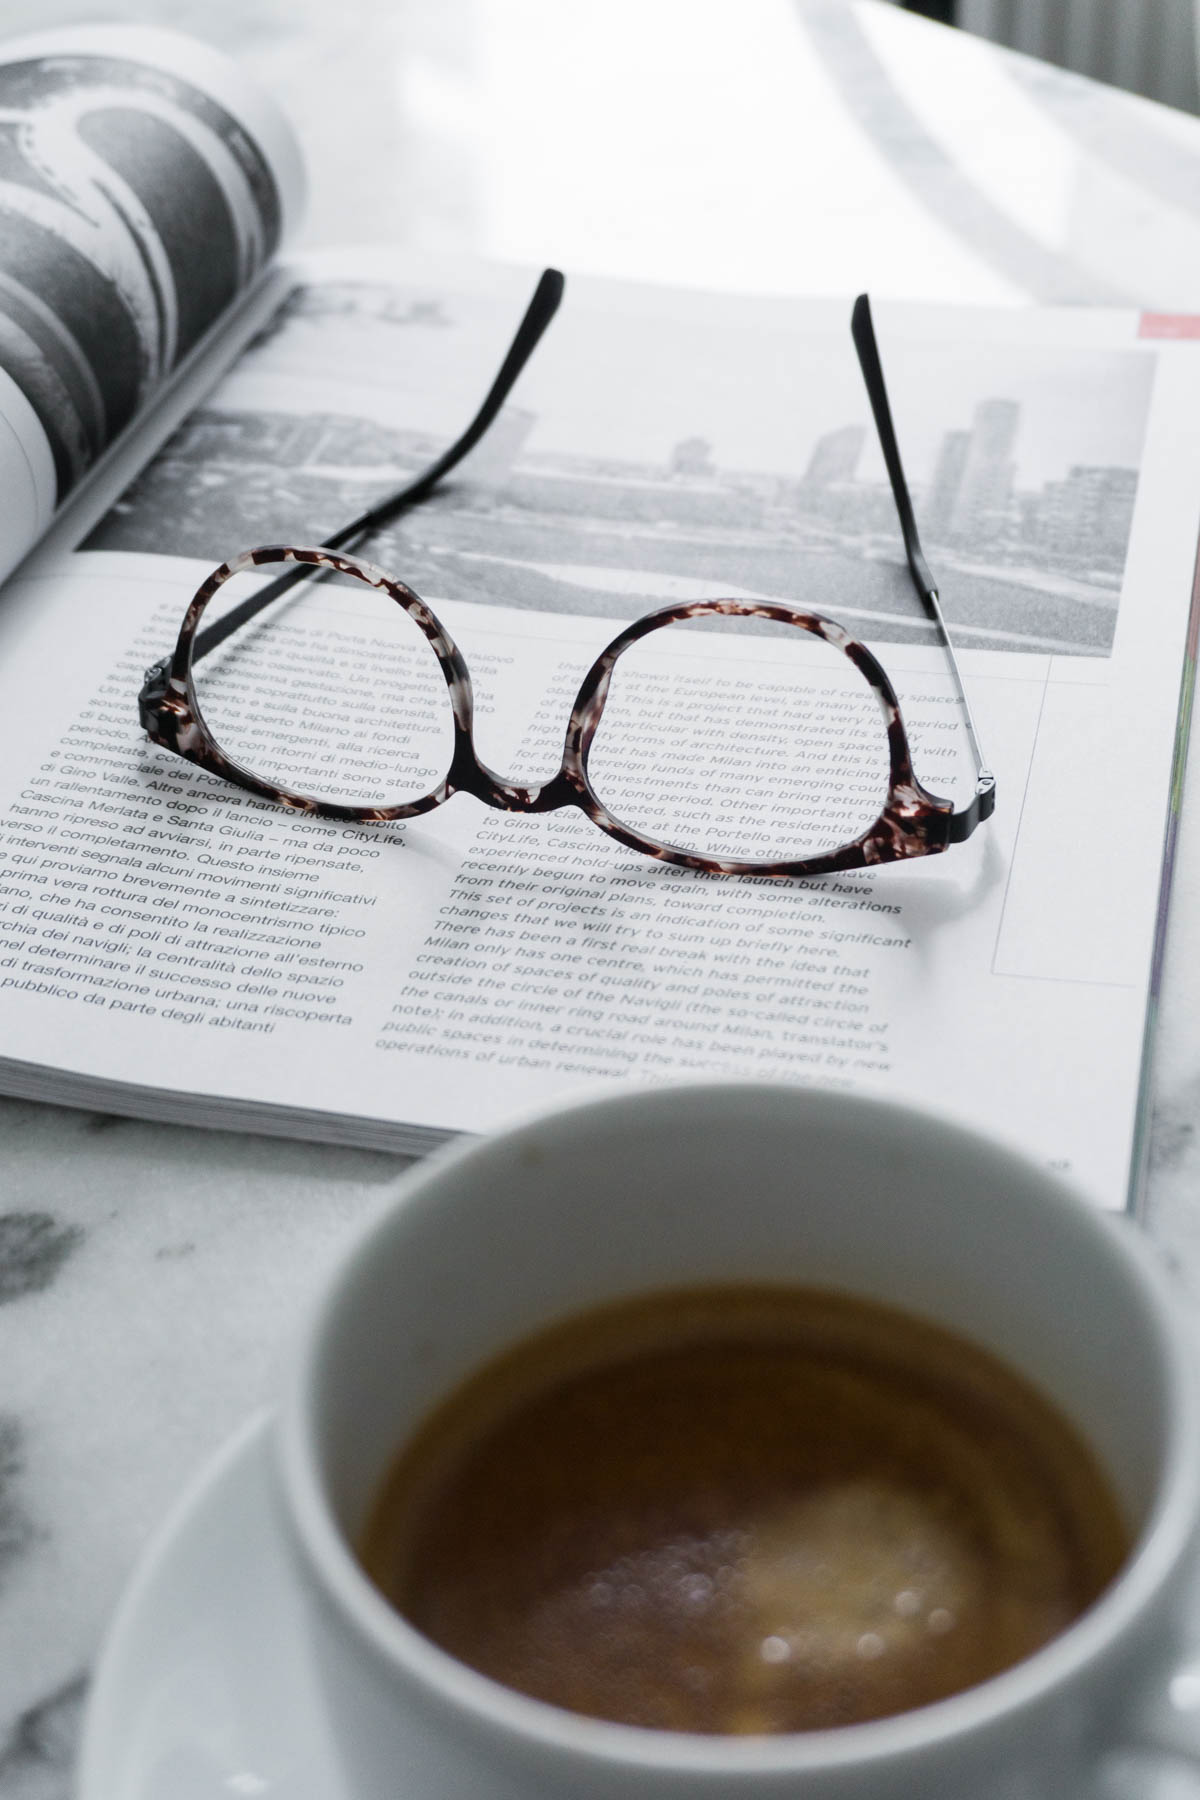 Morning Coffee Magazines and Glasses / RG Daily Blog